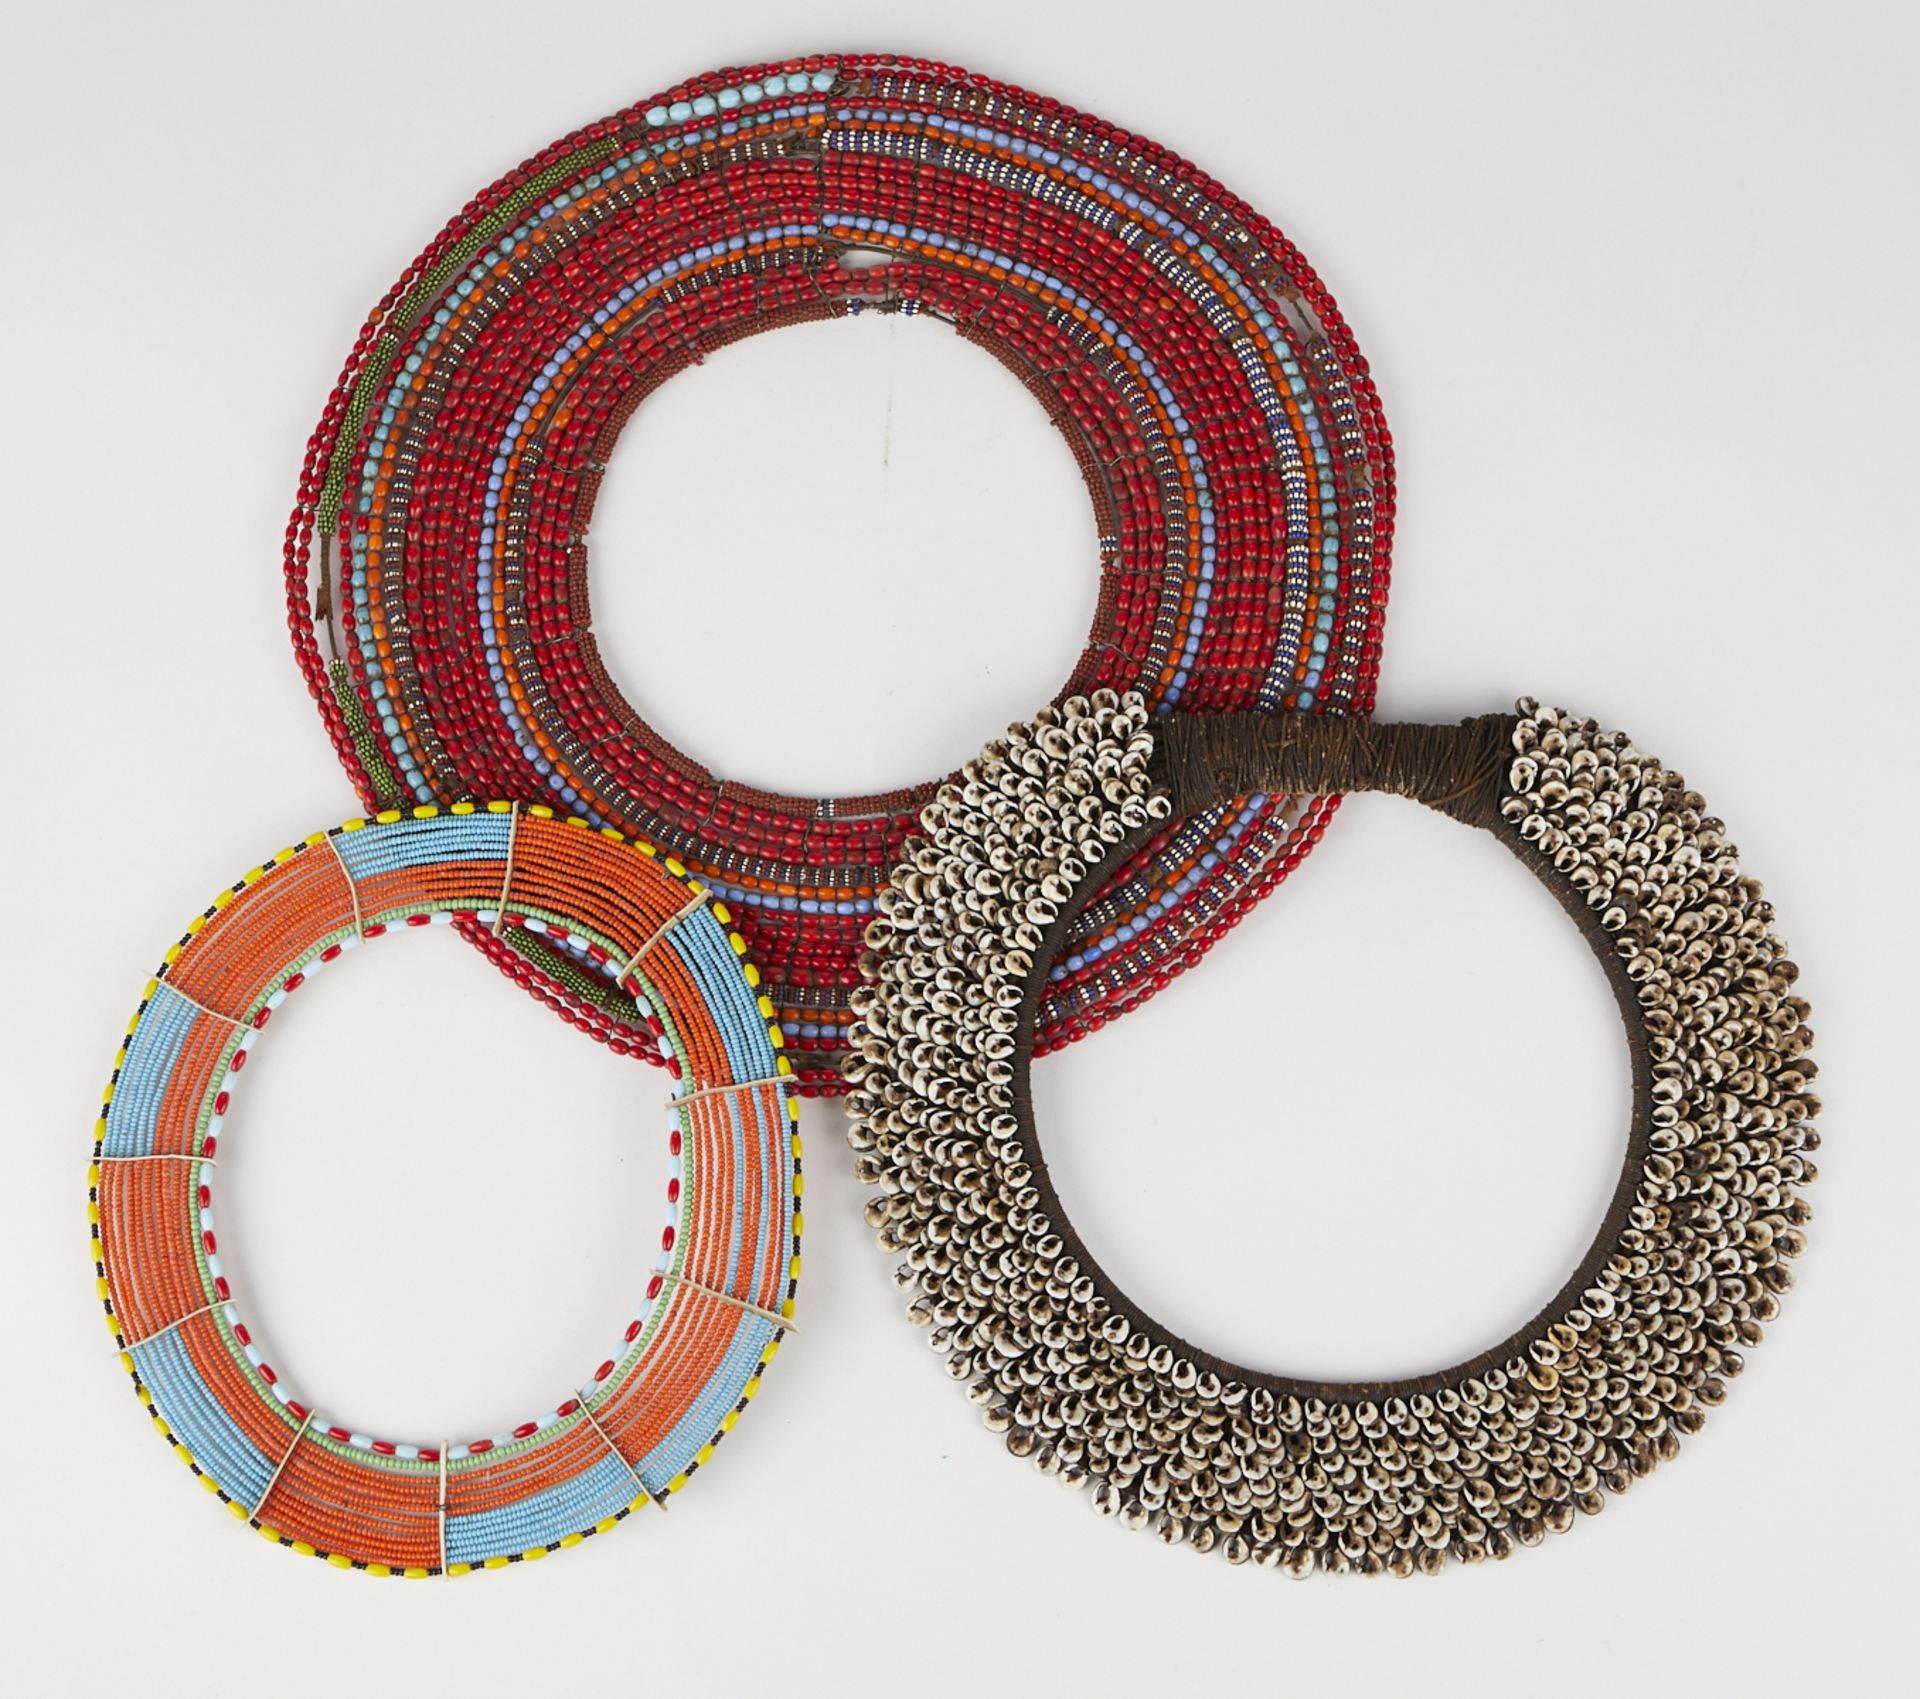 3 Collar Necklaces - 2 African and 1 New Guinea